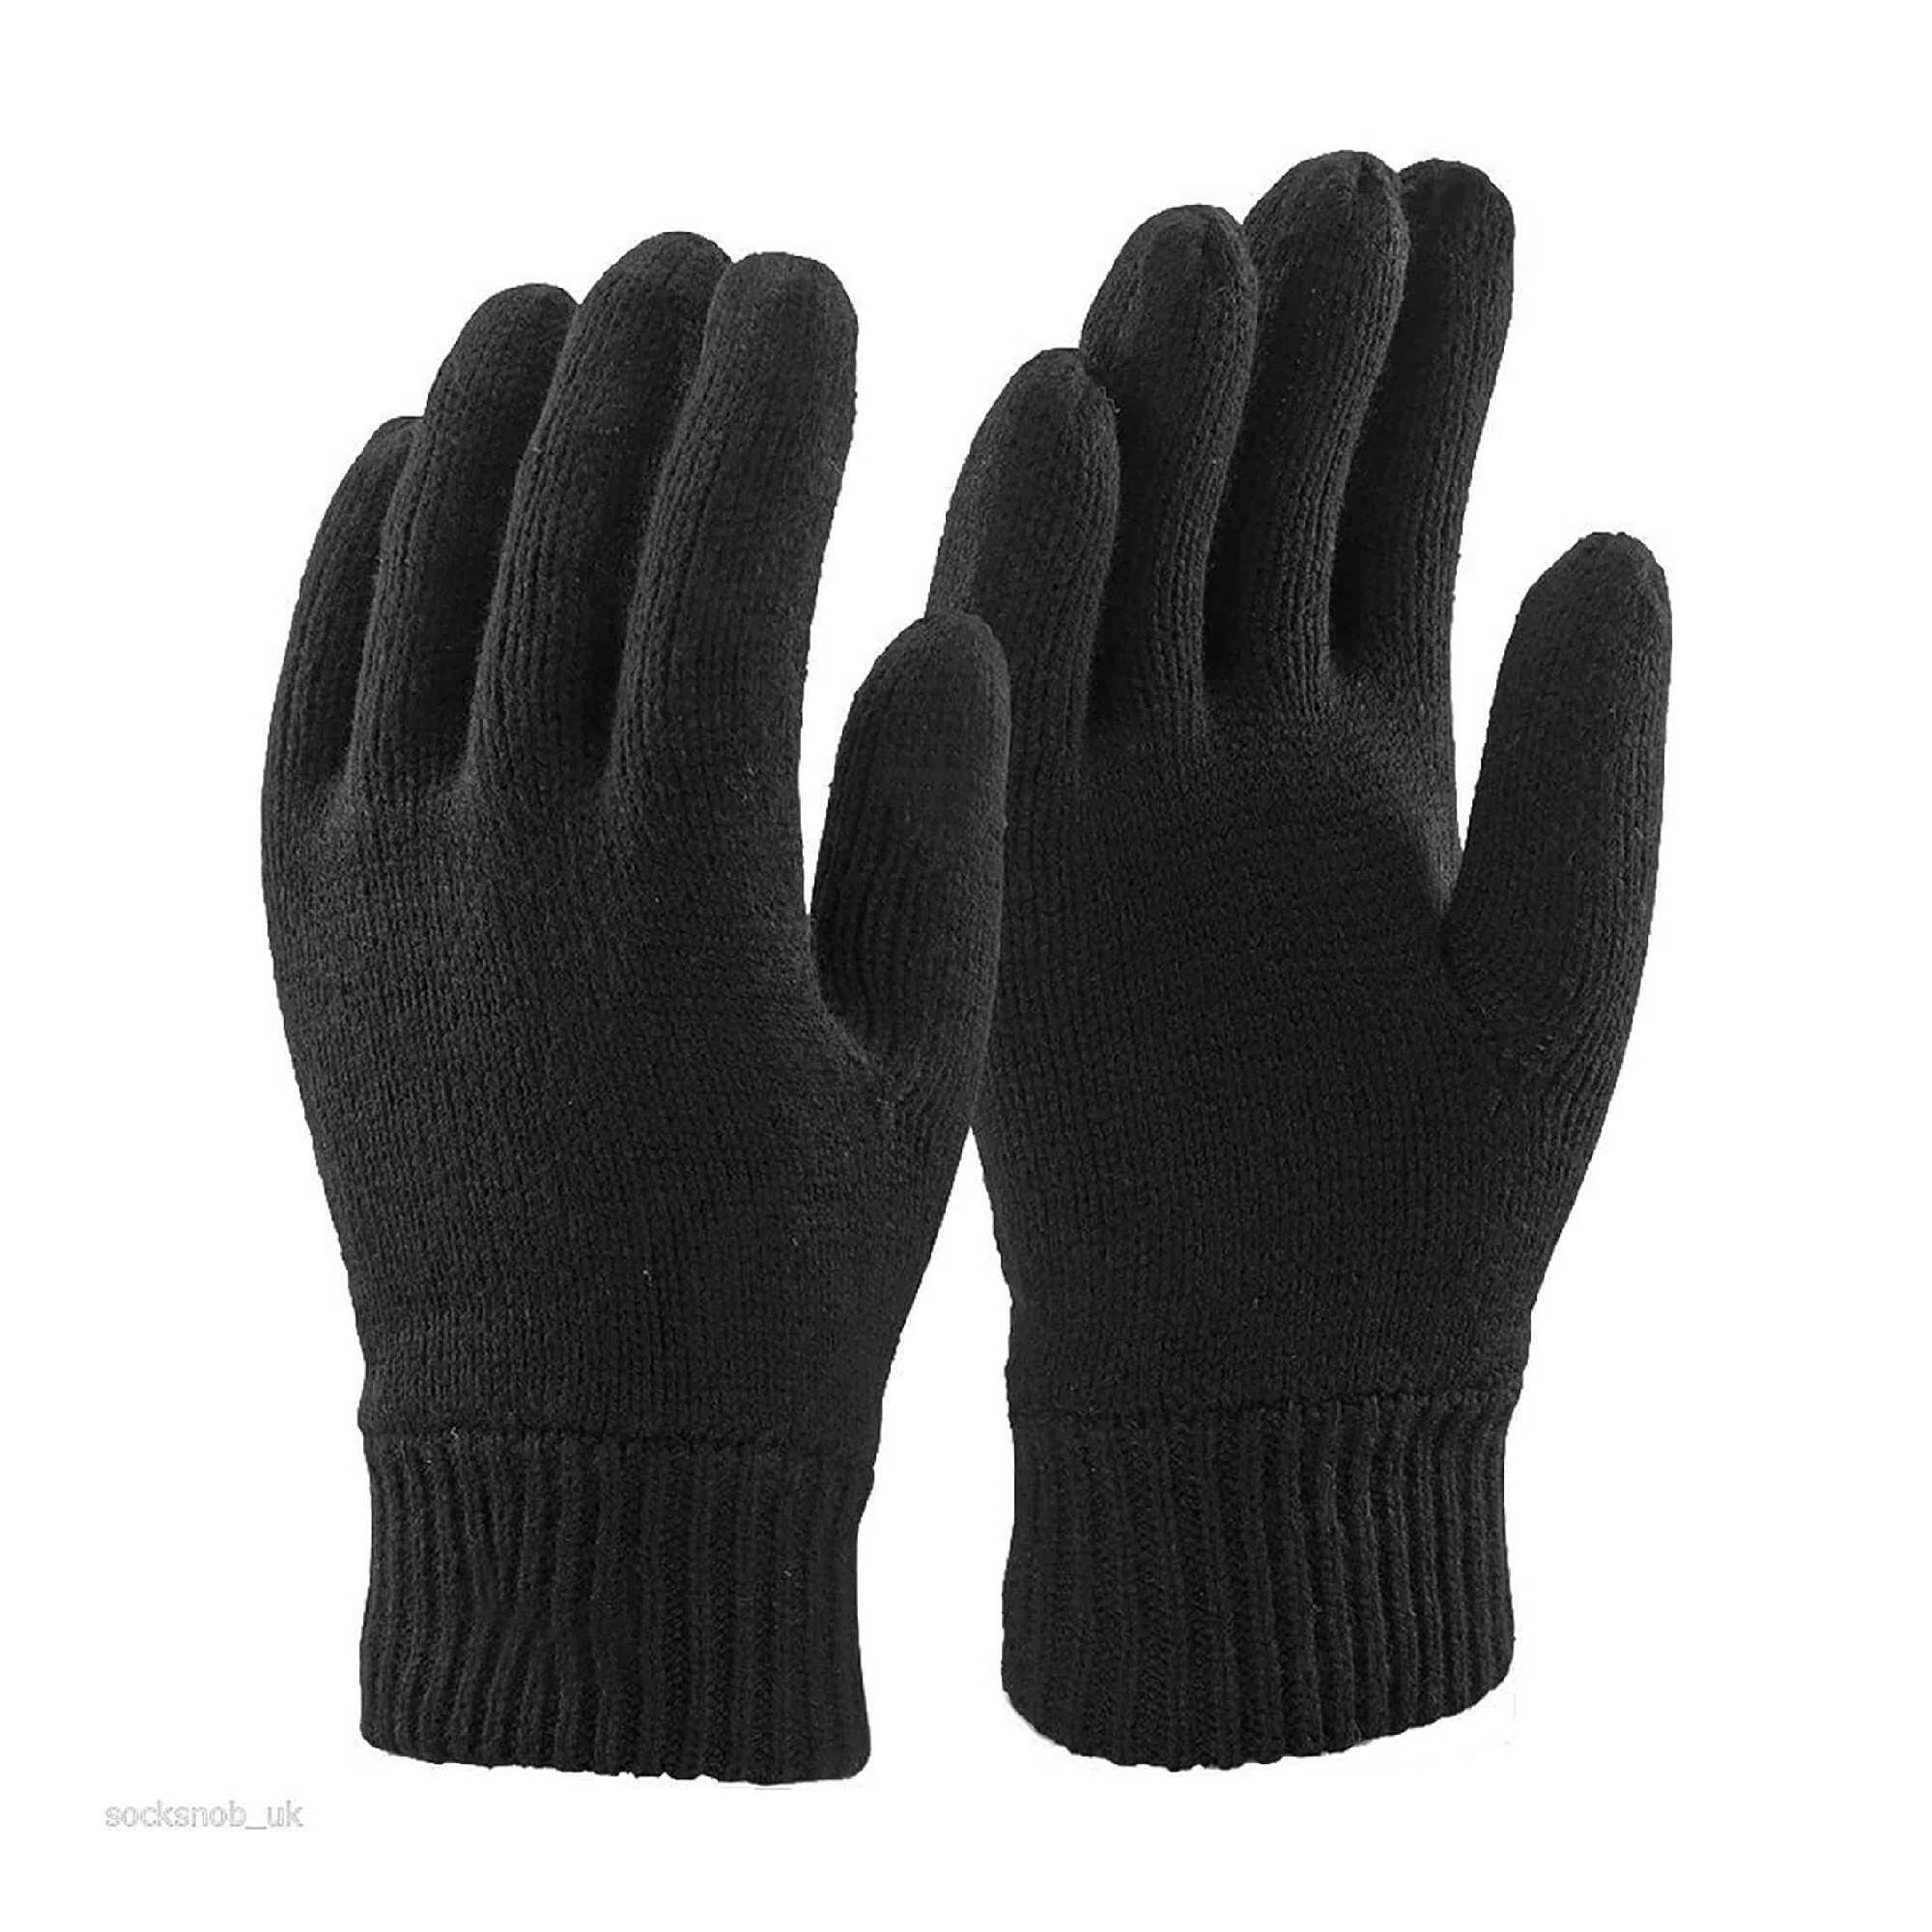 THINSULATE Mens 3M Black Thinsulate Thermal Lined Winter Gloves